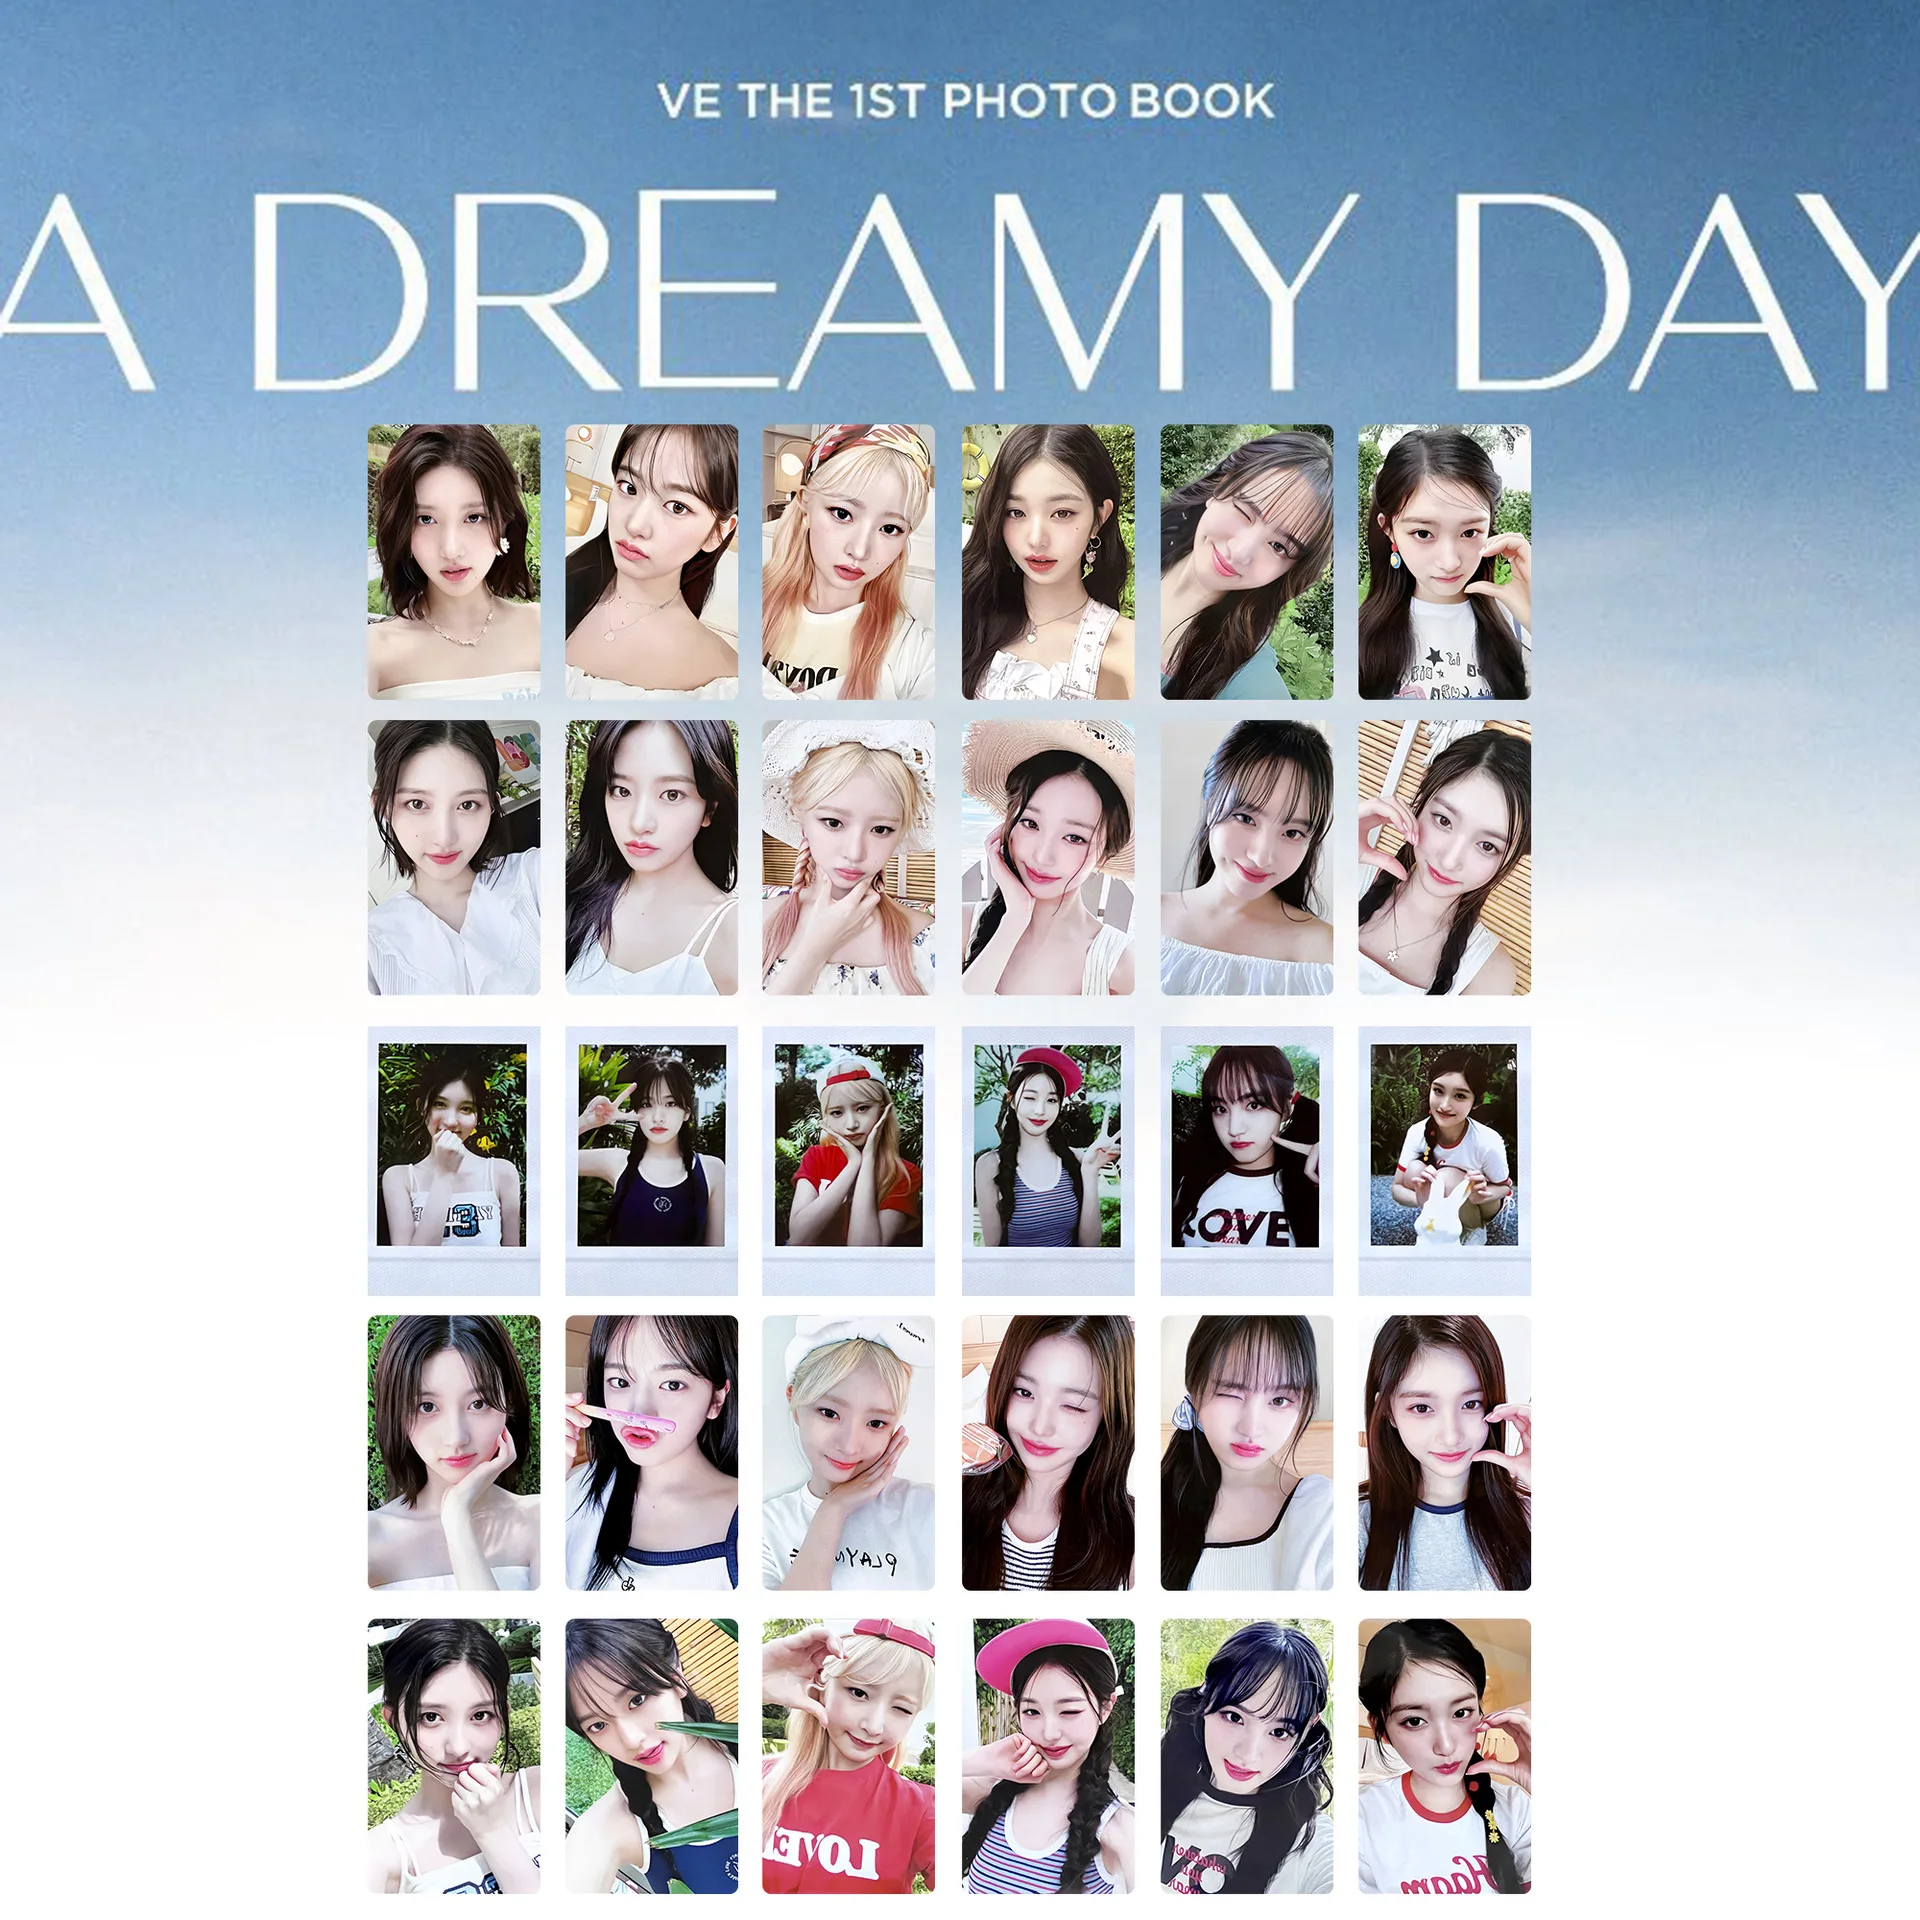 

30pcs KPOP IVE Summer Pictorial Selfie Photocards A DREAMY DAY Photo Book LOMO Cards WonYoung YuJin Paper Cards LEESEO Fans Gift